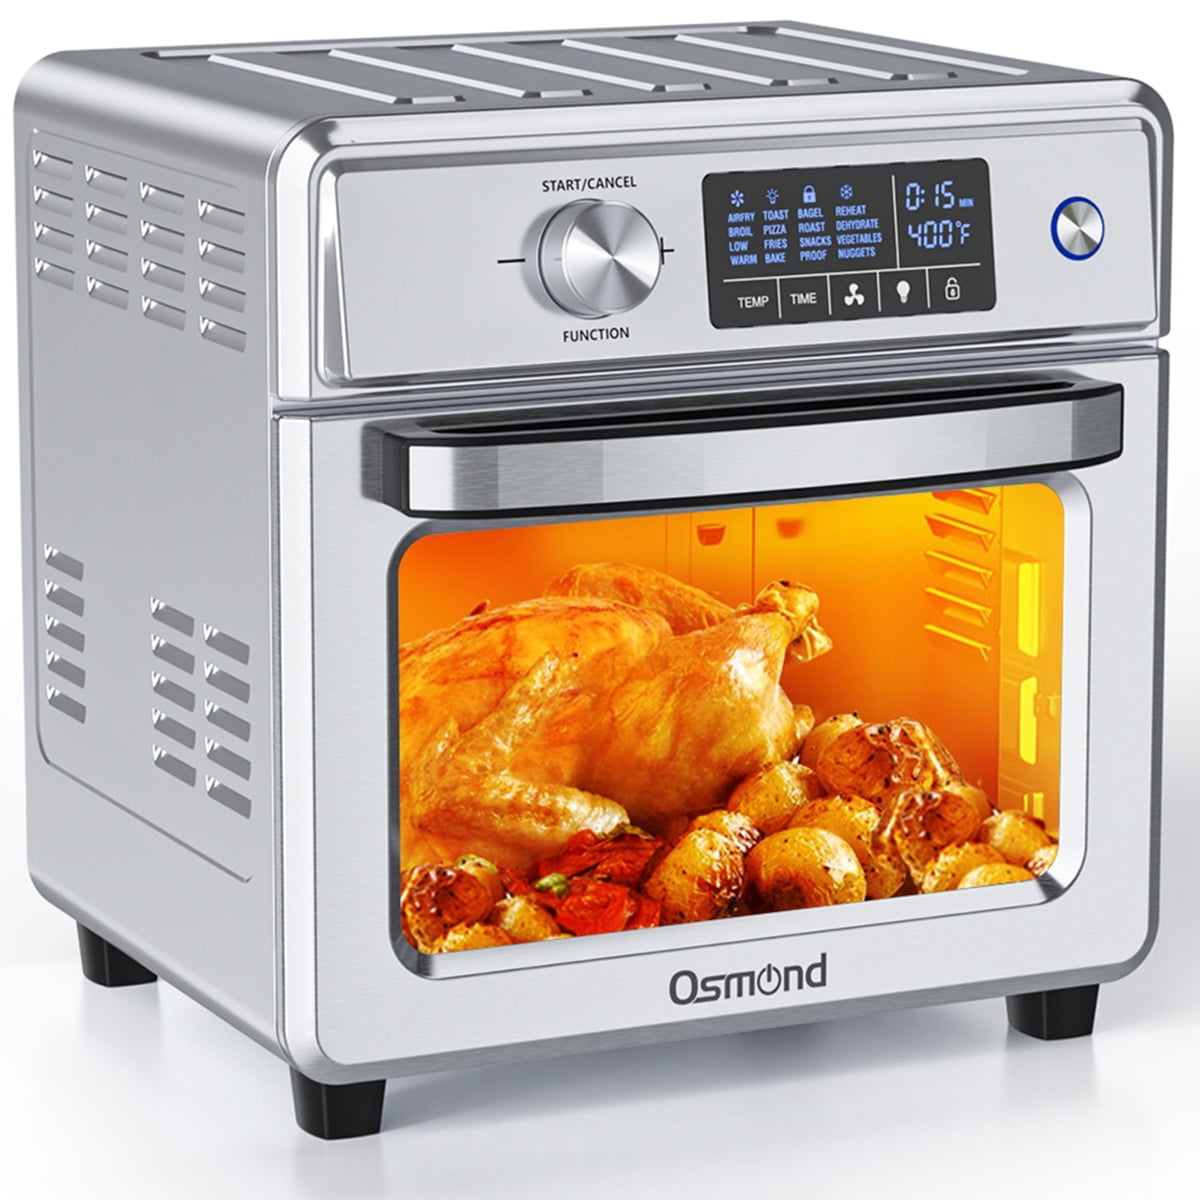 Ariawave 17qt Air Fryer & Toaster Oven Stainless Steel, Silver